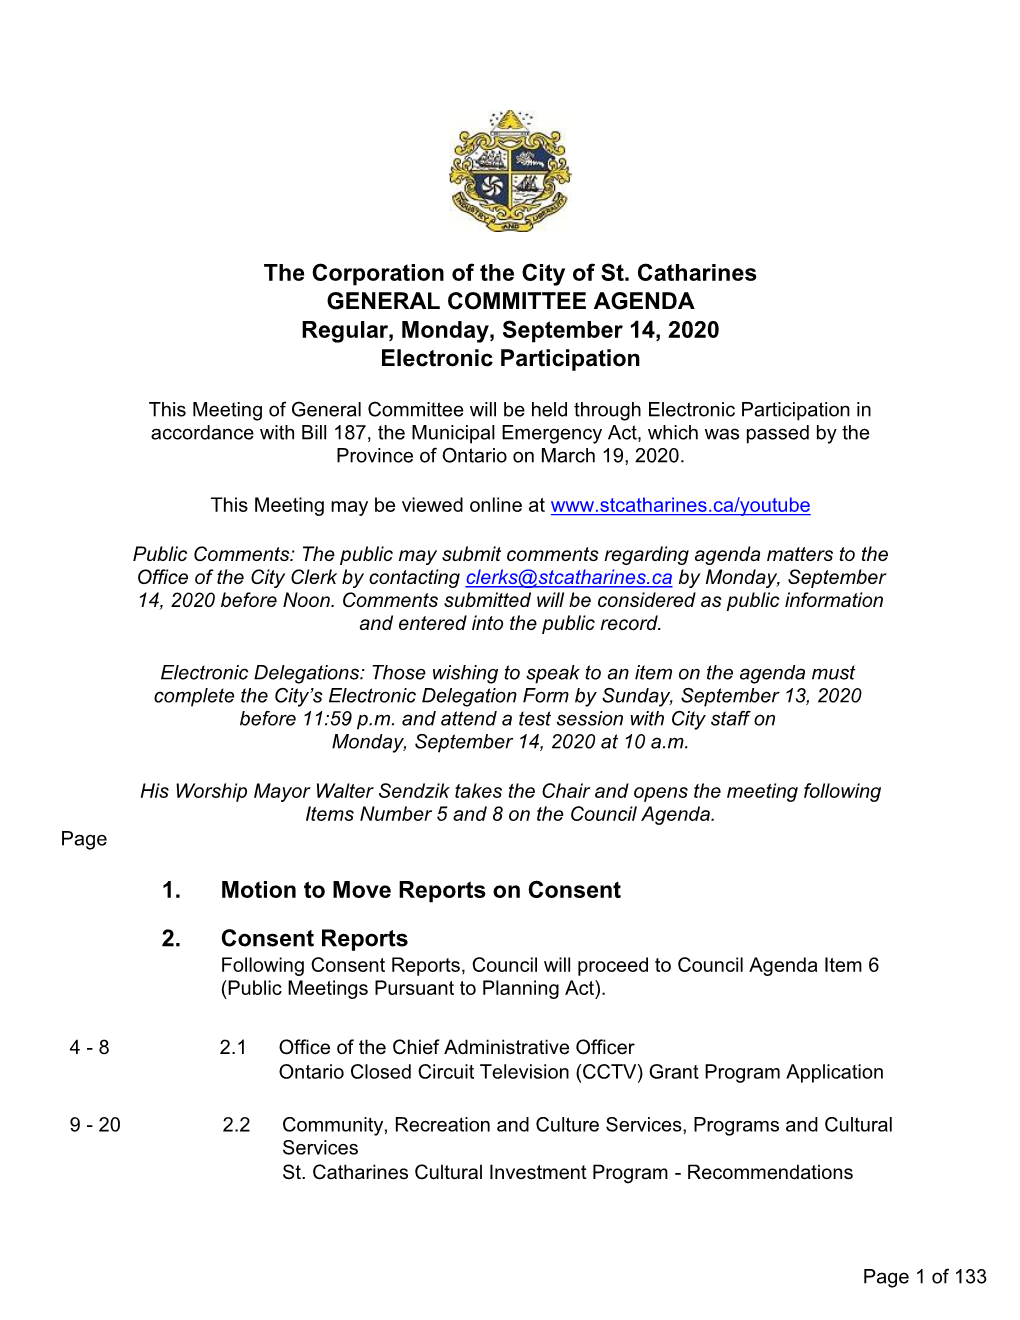 GENERAL COMMITTEE AGENDA Regular, Monday, September 14, 2020 Electronic Participation